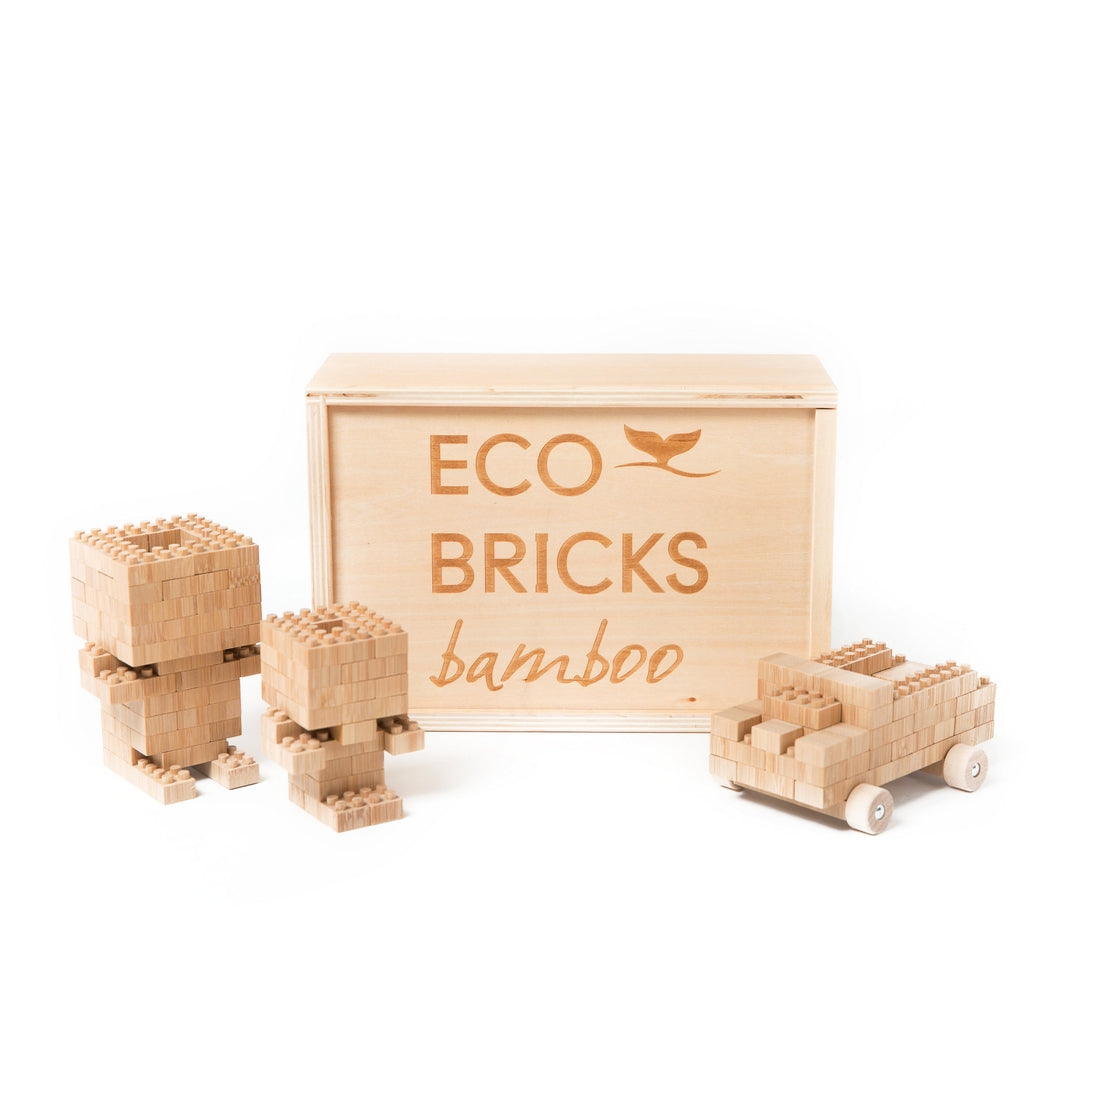 Cars and people built with Bamboo Eco-Bricks standing in front of a bamboo Eco-Bricks box